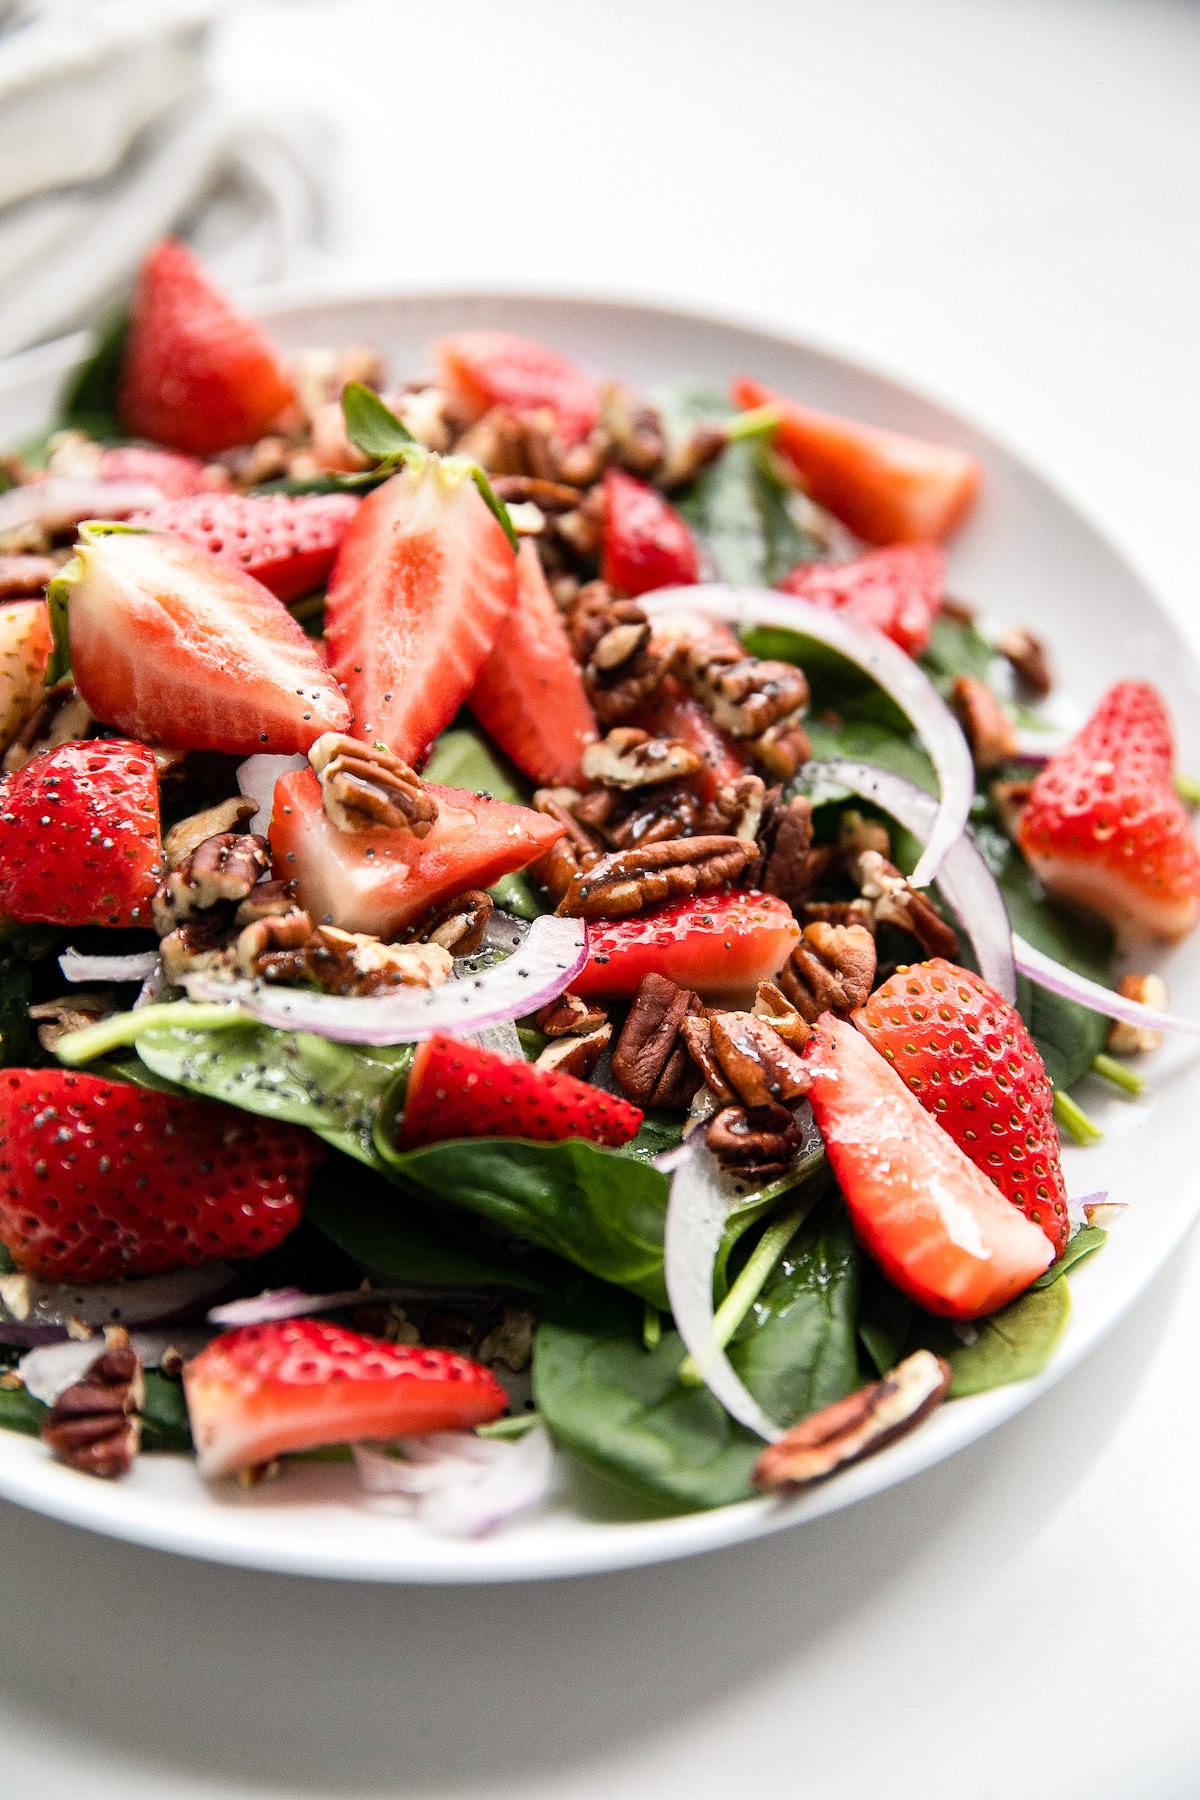 Salad with strawberries, onions, spinach, and pecans.